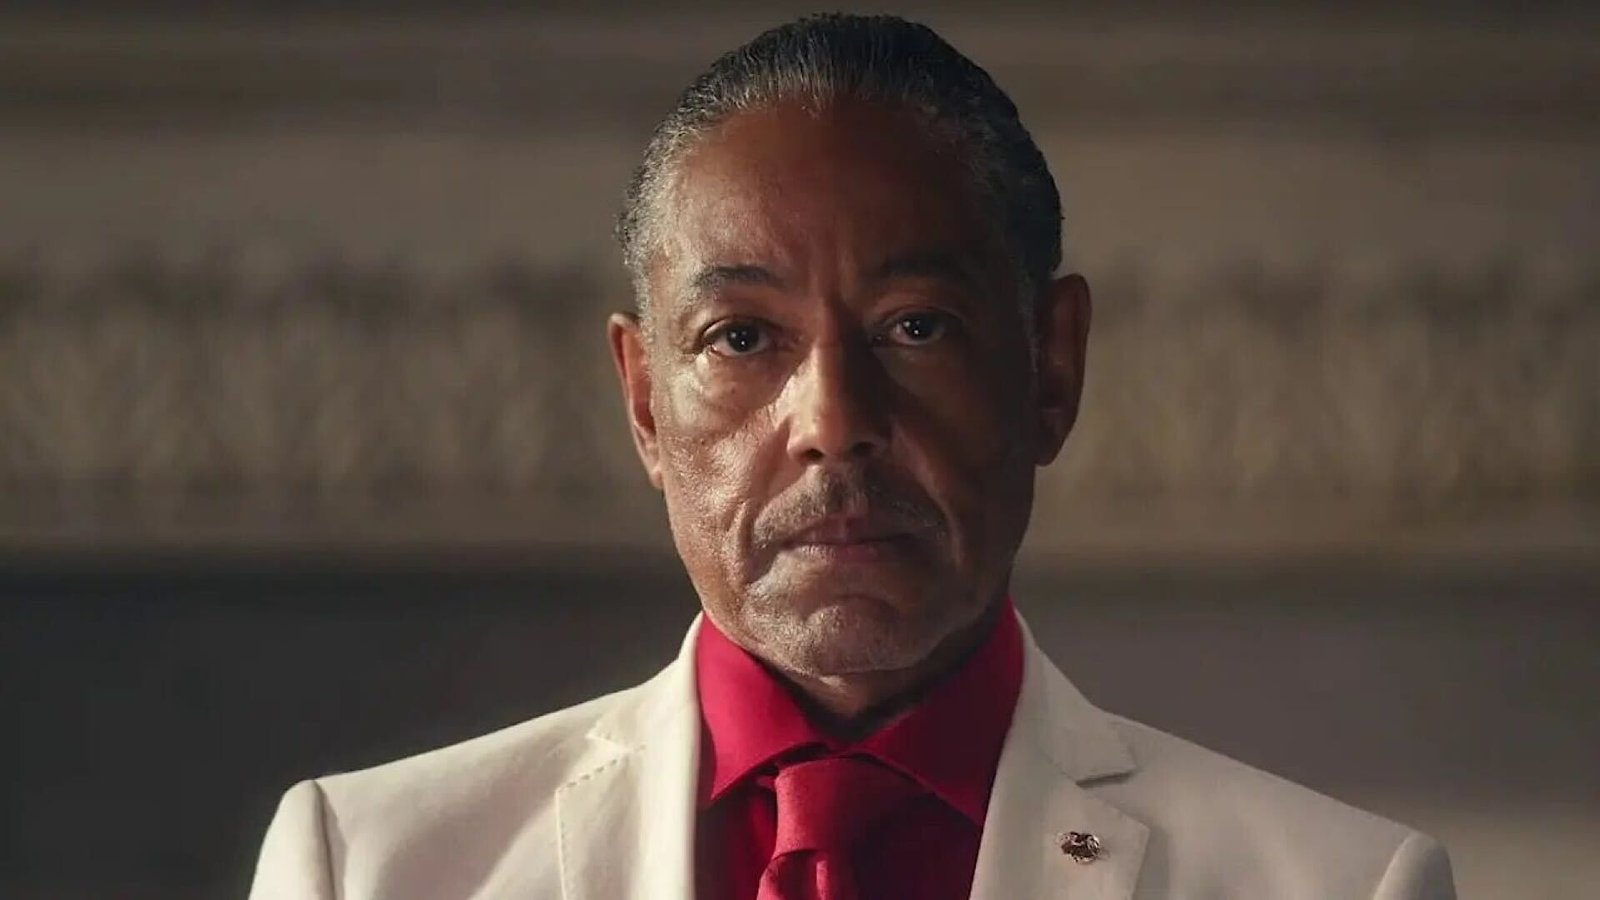 Giancarlo Esposito Finally Confirmed for 'Sooner Rather Than Later' MCU Role, but as Who?